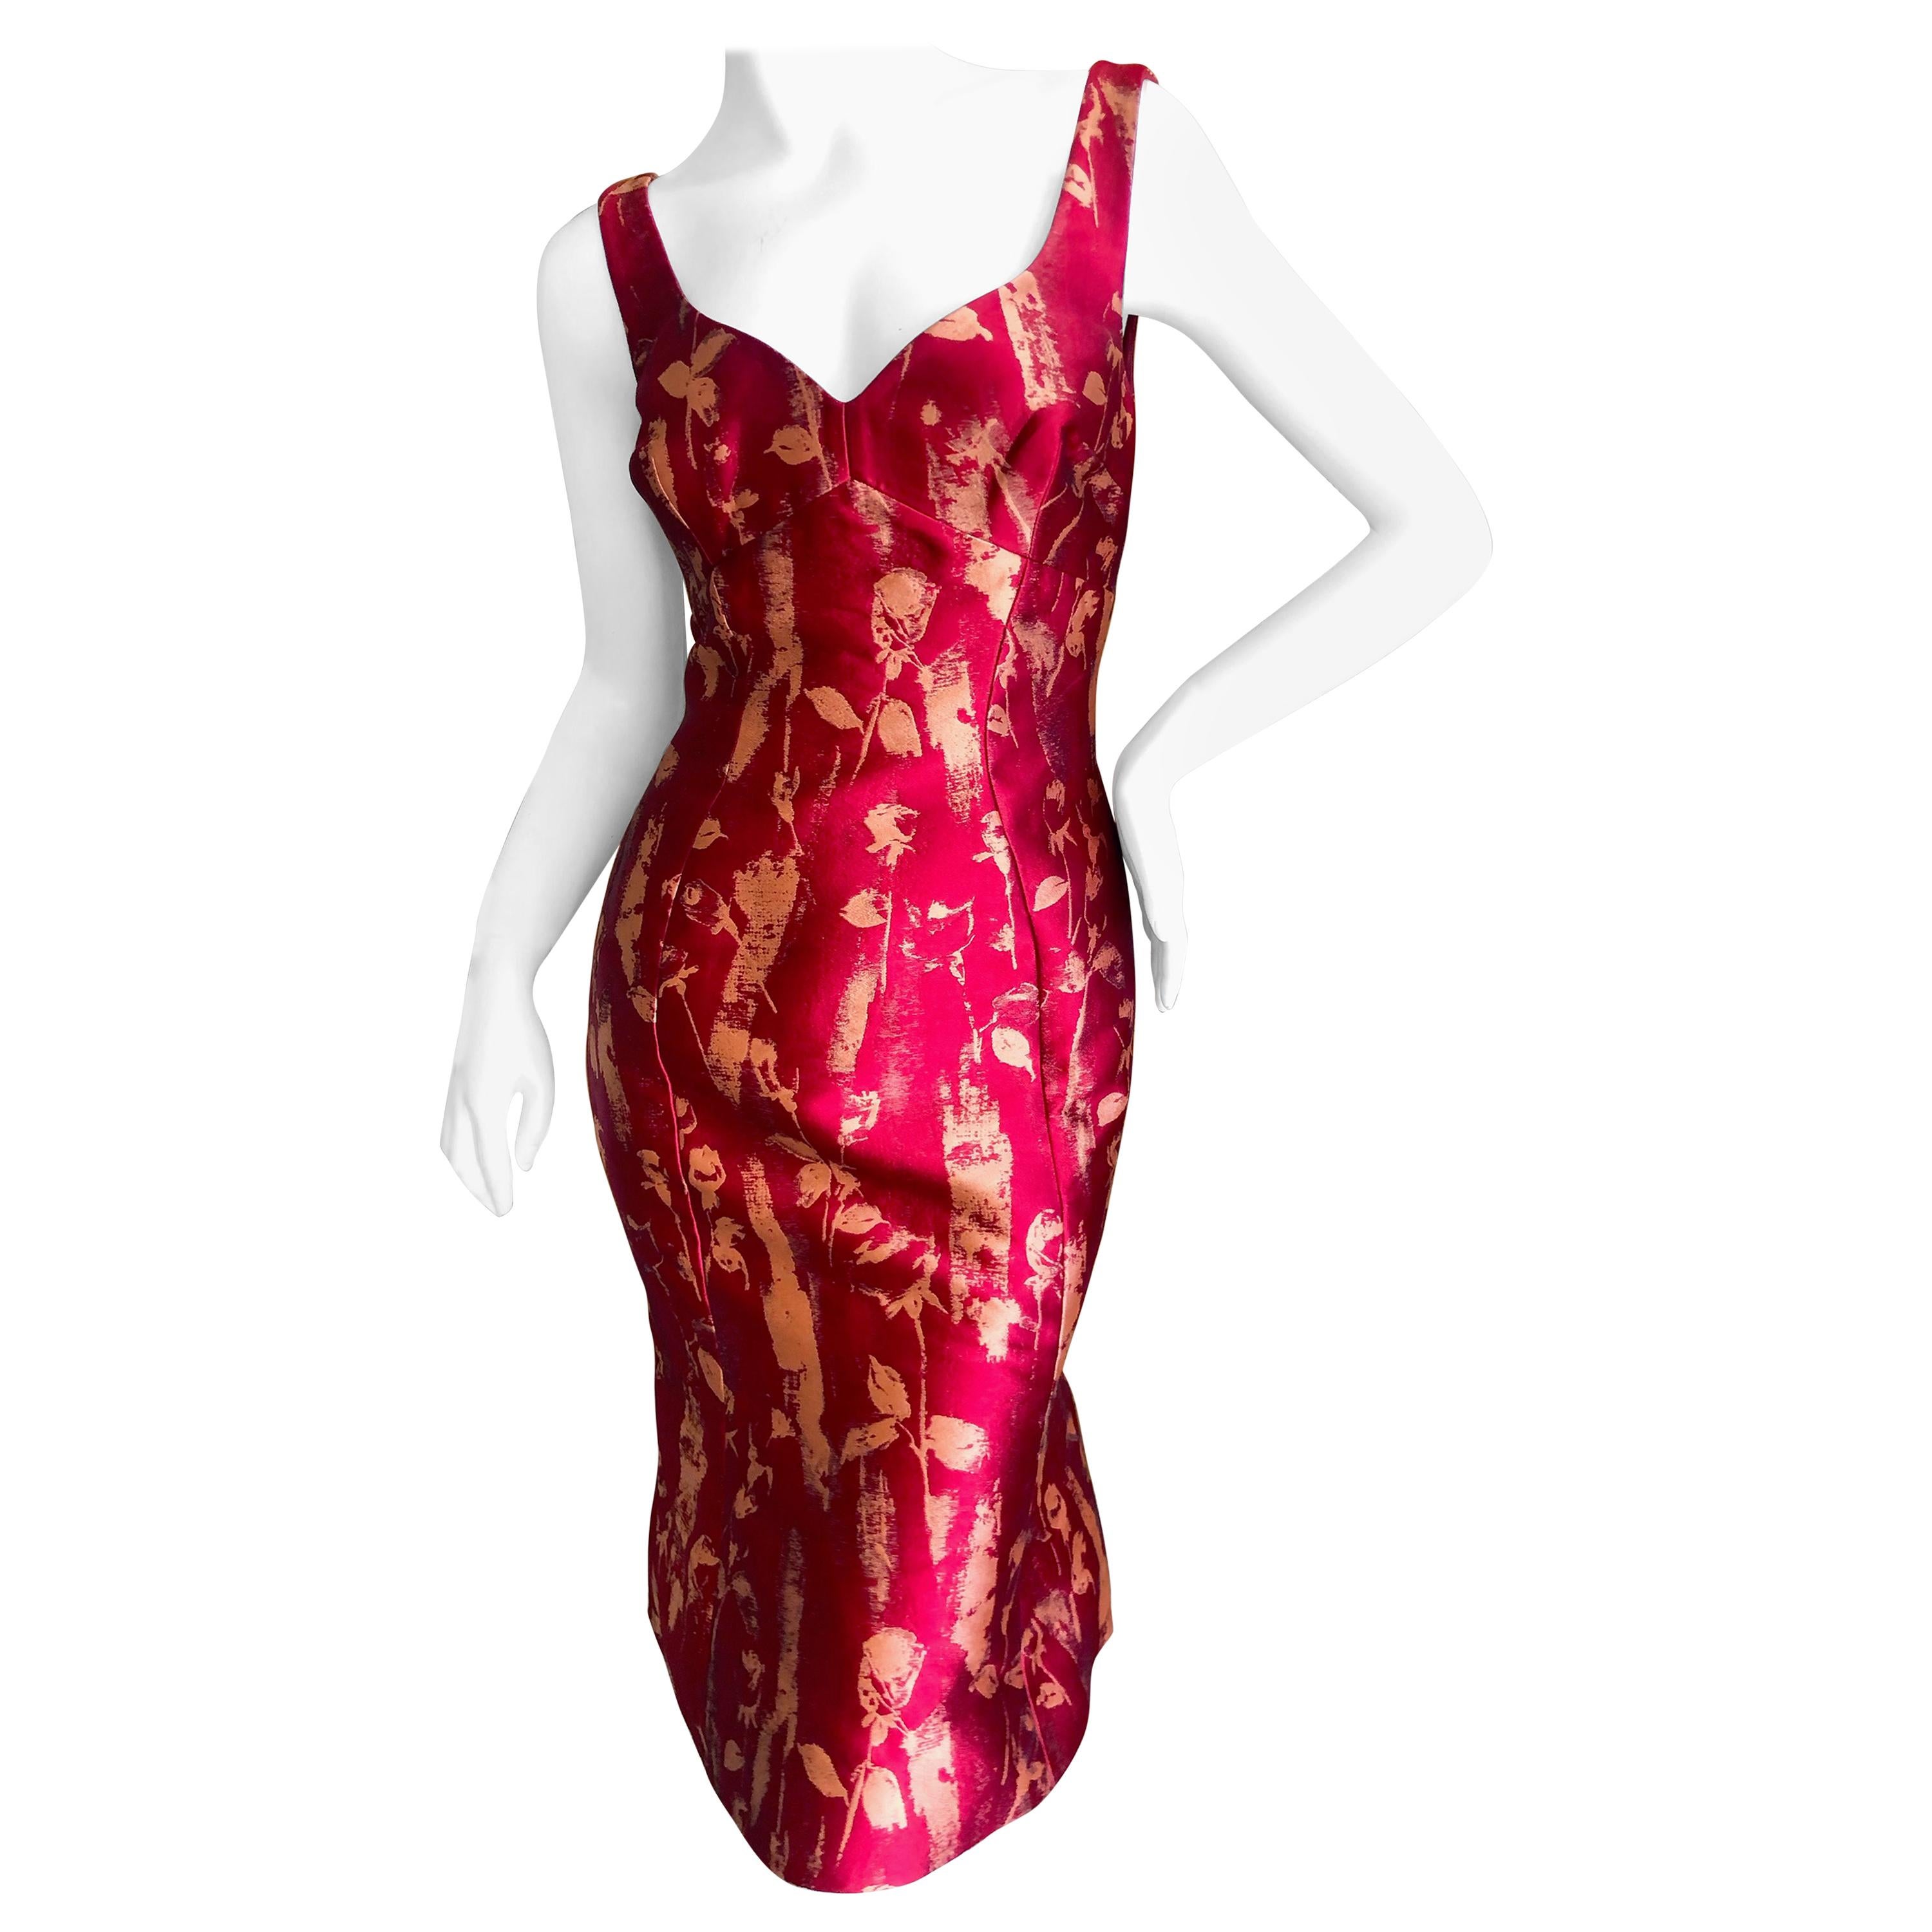 Vivienne Westwood Red and Gold Tulip Print Brocade Cocktail Dress For Sale